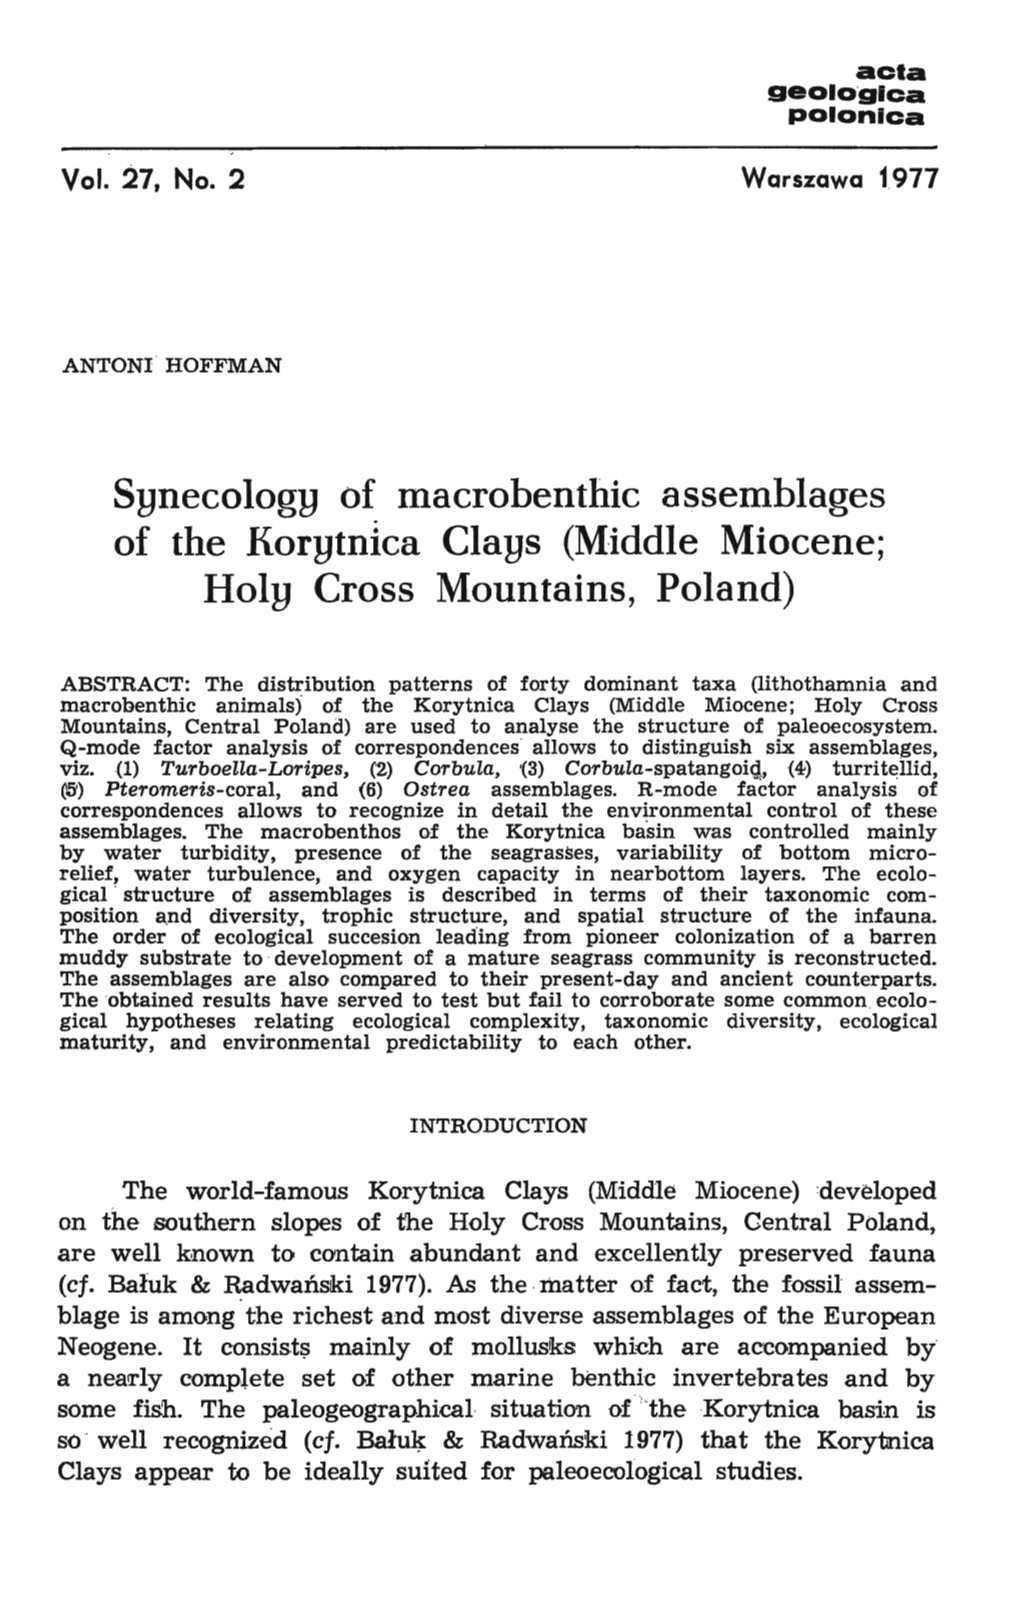 Synecology of Macroberithic Assemblages of the Korytnica Clays (Middle Miocene; Holy Cross Mountains, Poland)